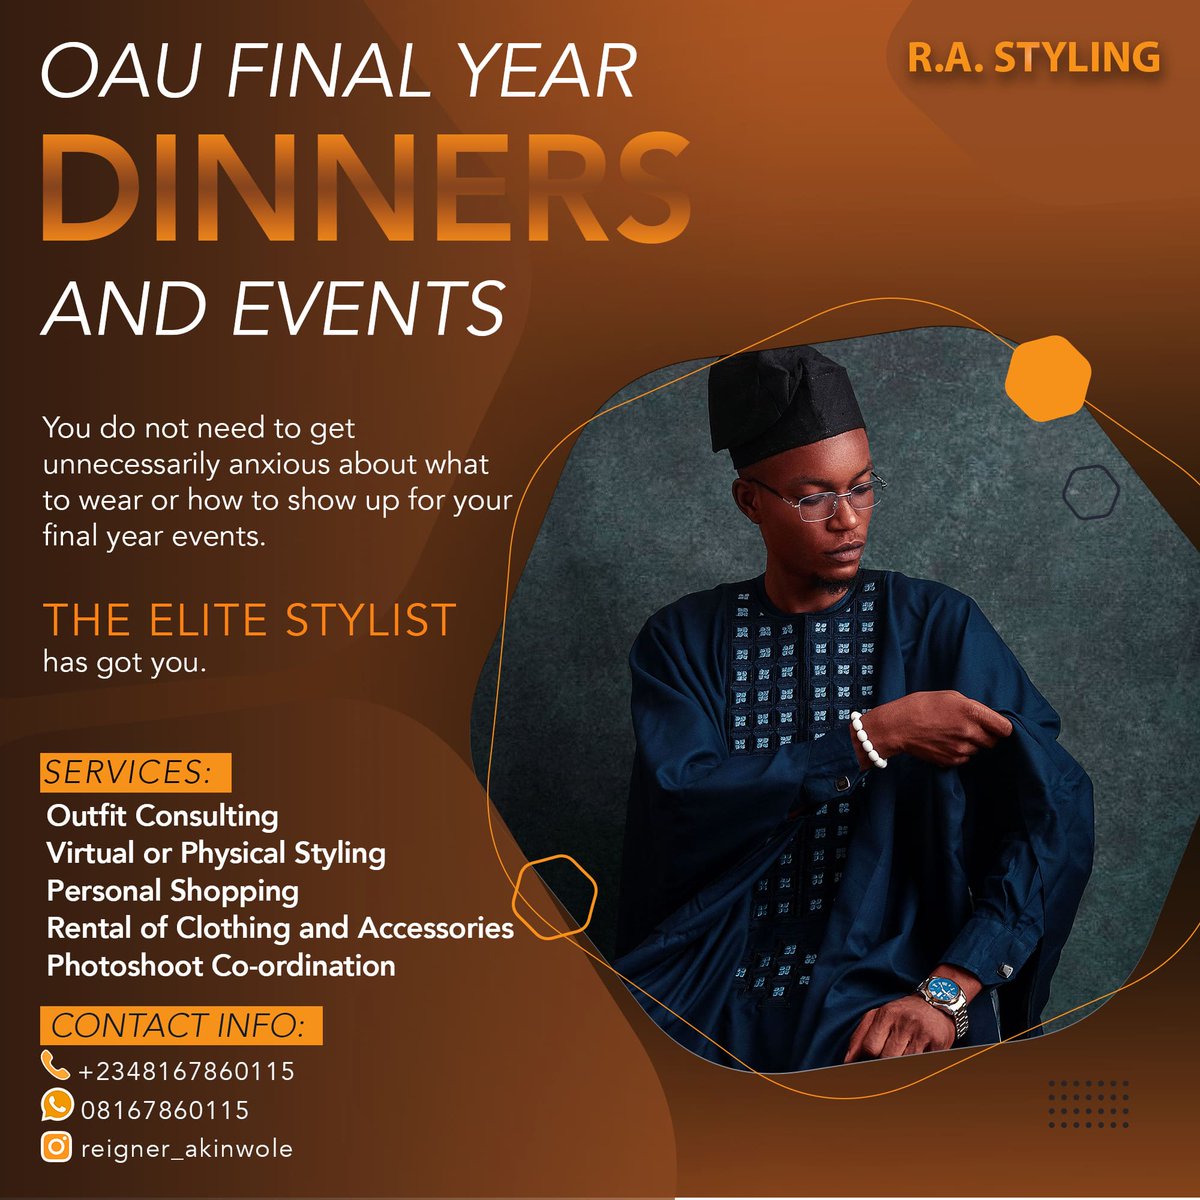 OAU FYB, are you readyyyyyyy???
Don't look basic for nobody for your upcoming events. Shine bright 😎✨.
Whatever outfit problem you have, I can solve it for you just send a DM and see it solved.
Please, help RT guys!!!

#fashiontwitter #oauevents #styledbyreigner